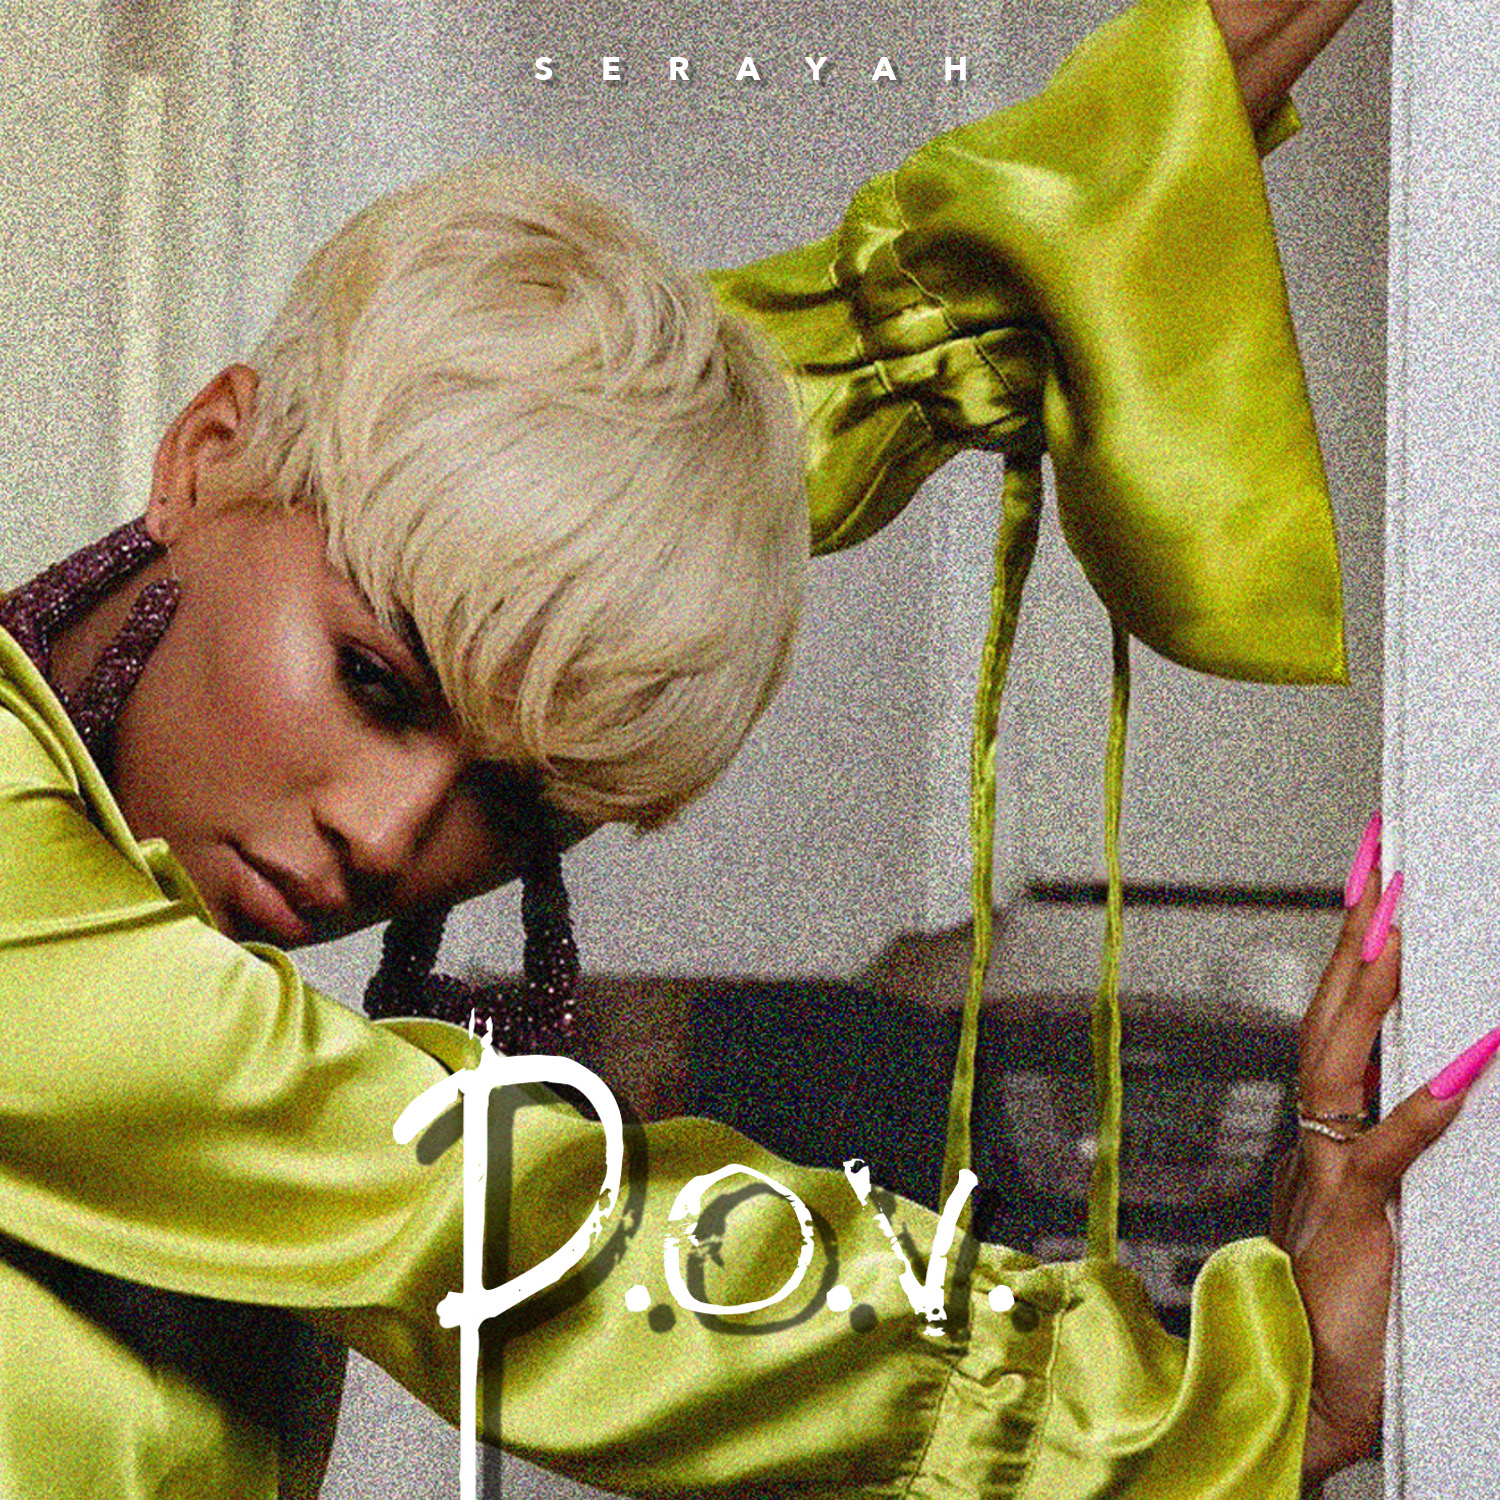 Serayah Shares Her ‘P.O.V.’ In First 2022 Single